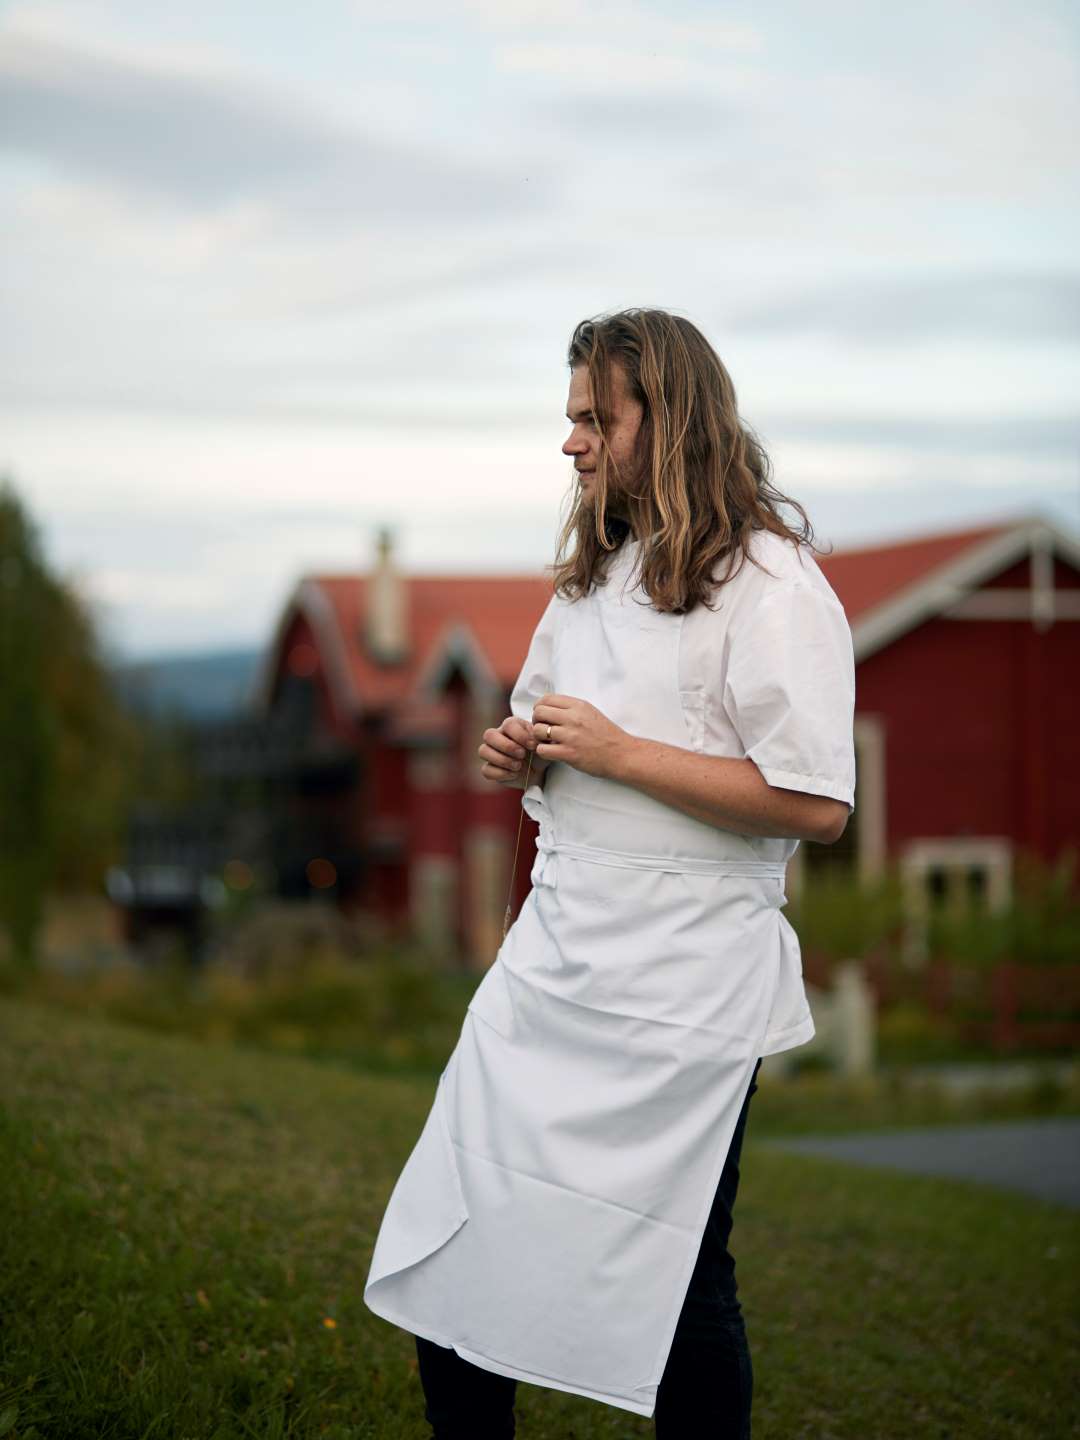 Magnus Nilsson's Momentous Moments: The day Magnus realised influence is OK, copying is not!